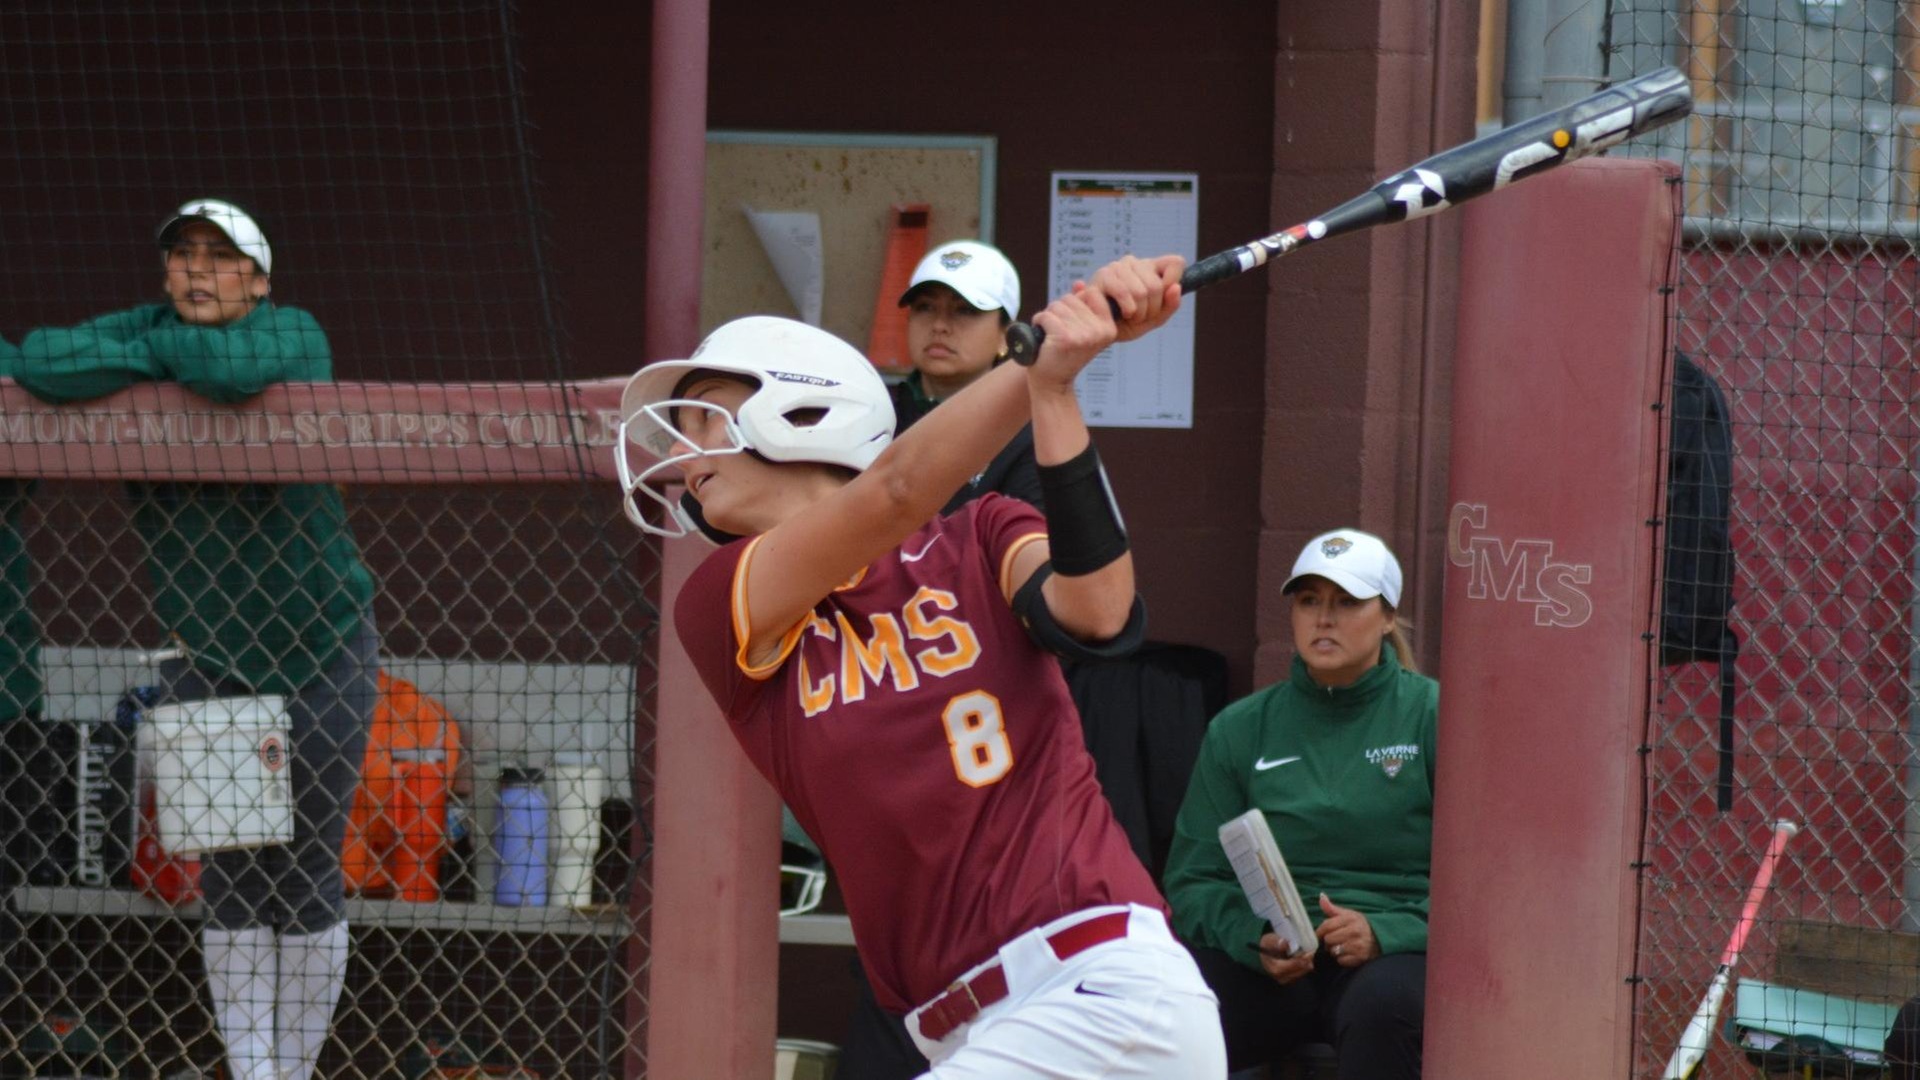 Rachel Sapirstein delivered the game-winning hit in the fifth (photo by Abbie Bobeck)